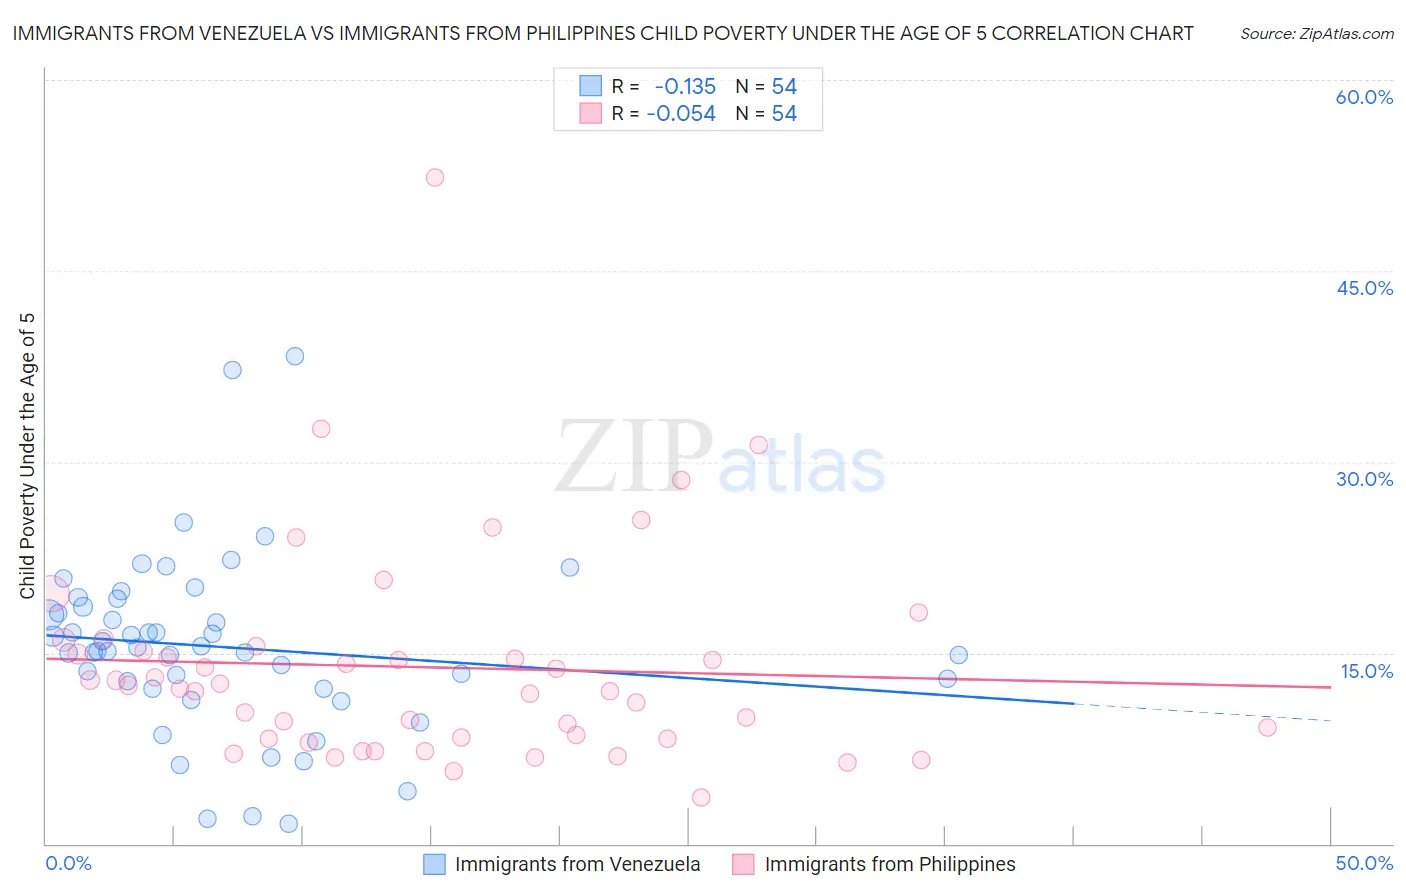 Immigrants from Venezuela vs Immigrants from Philippines Child Poverty Under the Age of 5